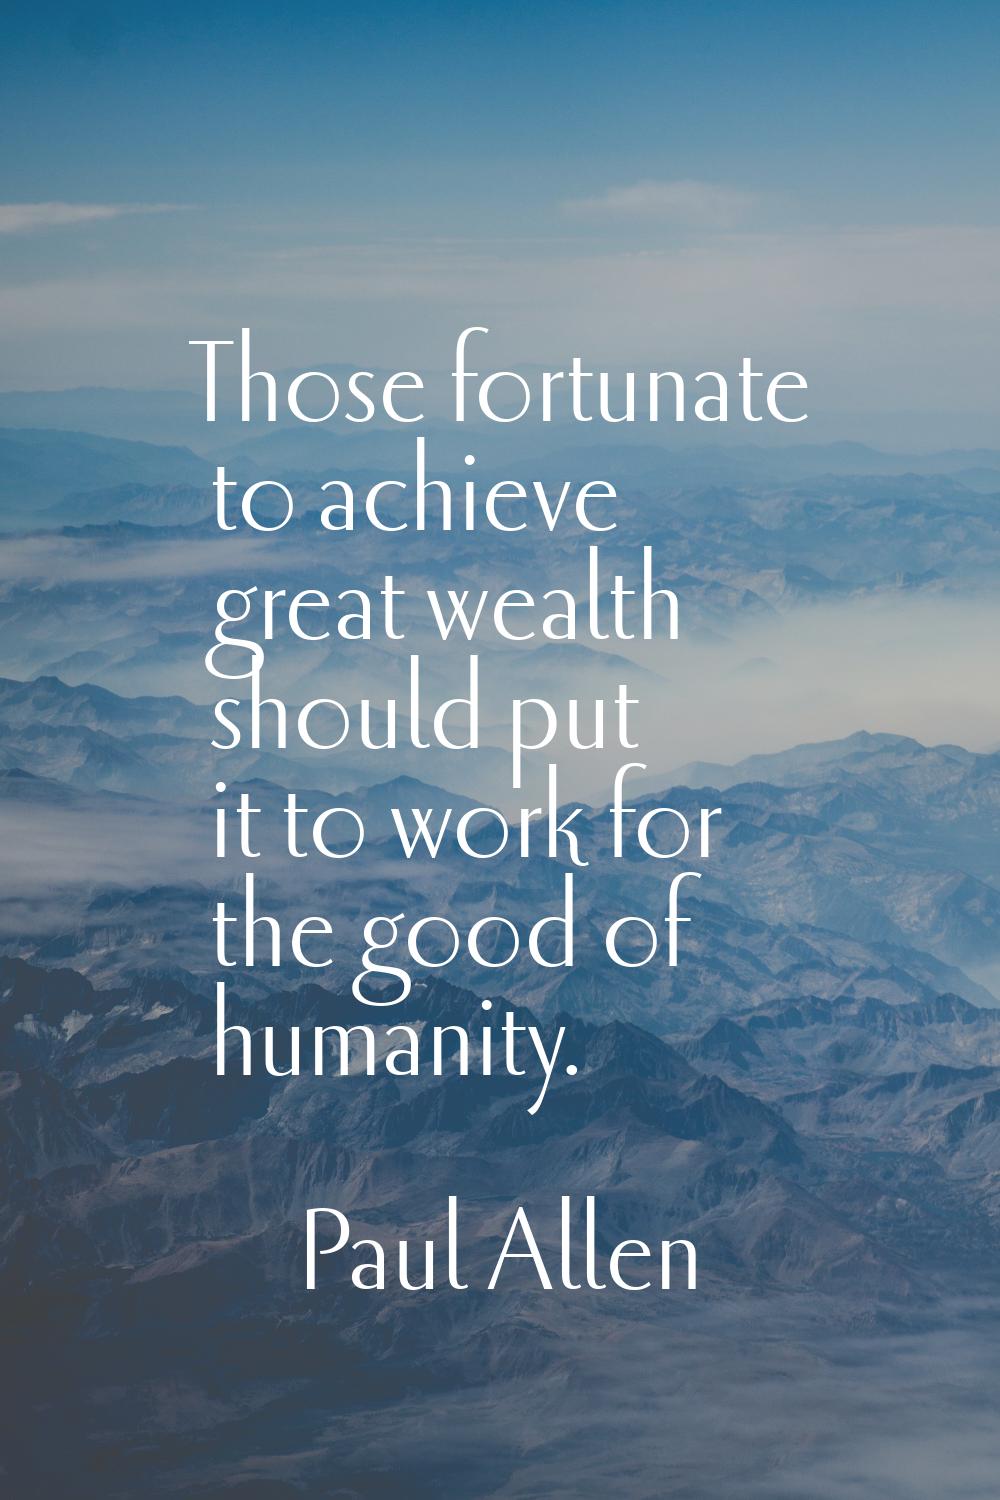 Those fortunate to achieve great wealth should put it to work for the good of humanity.